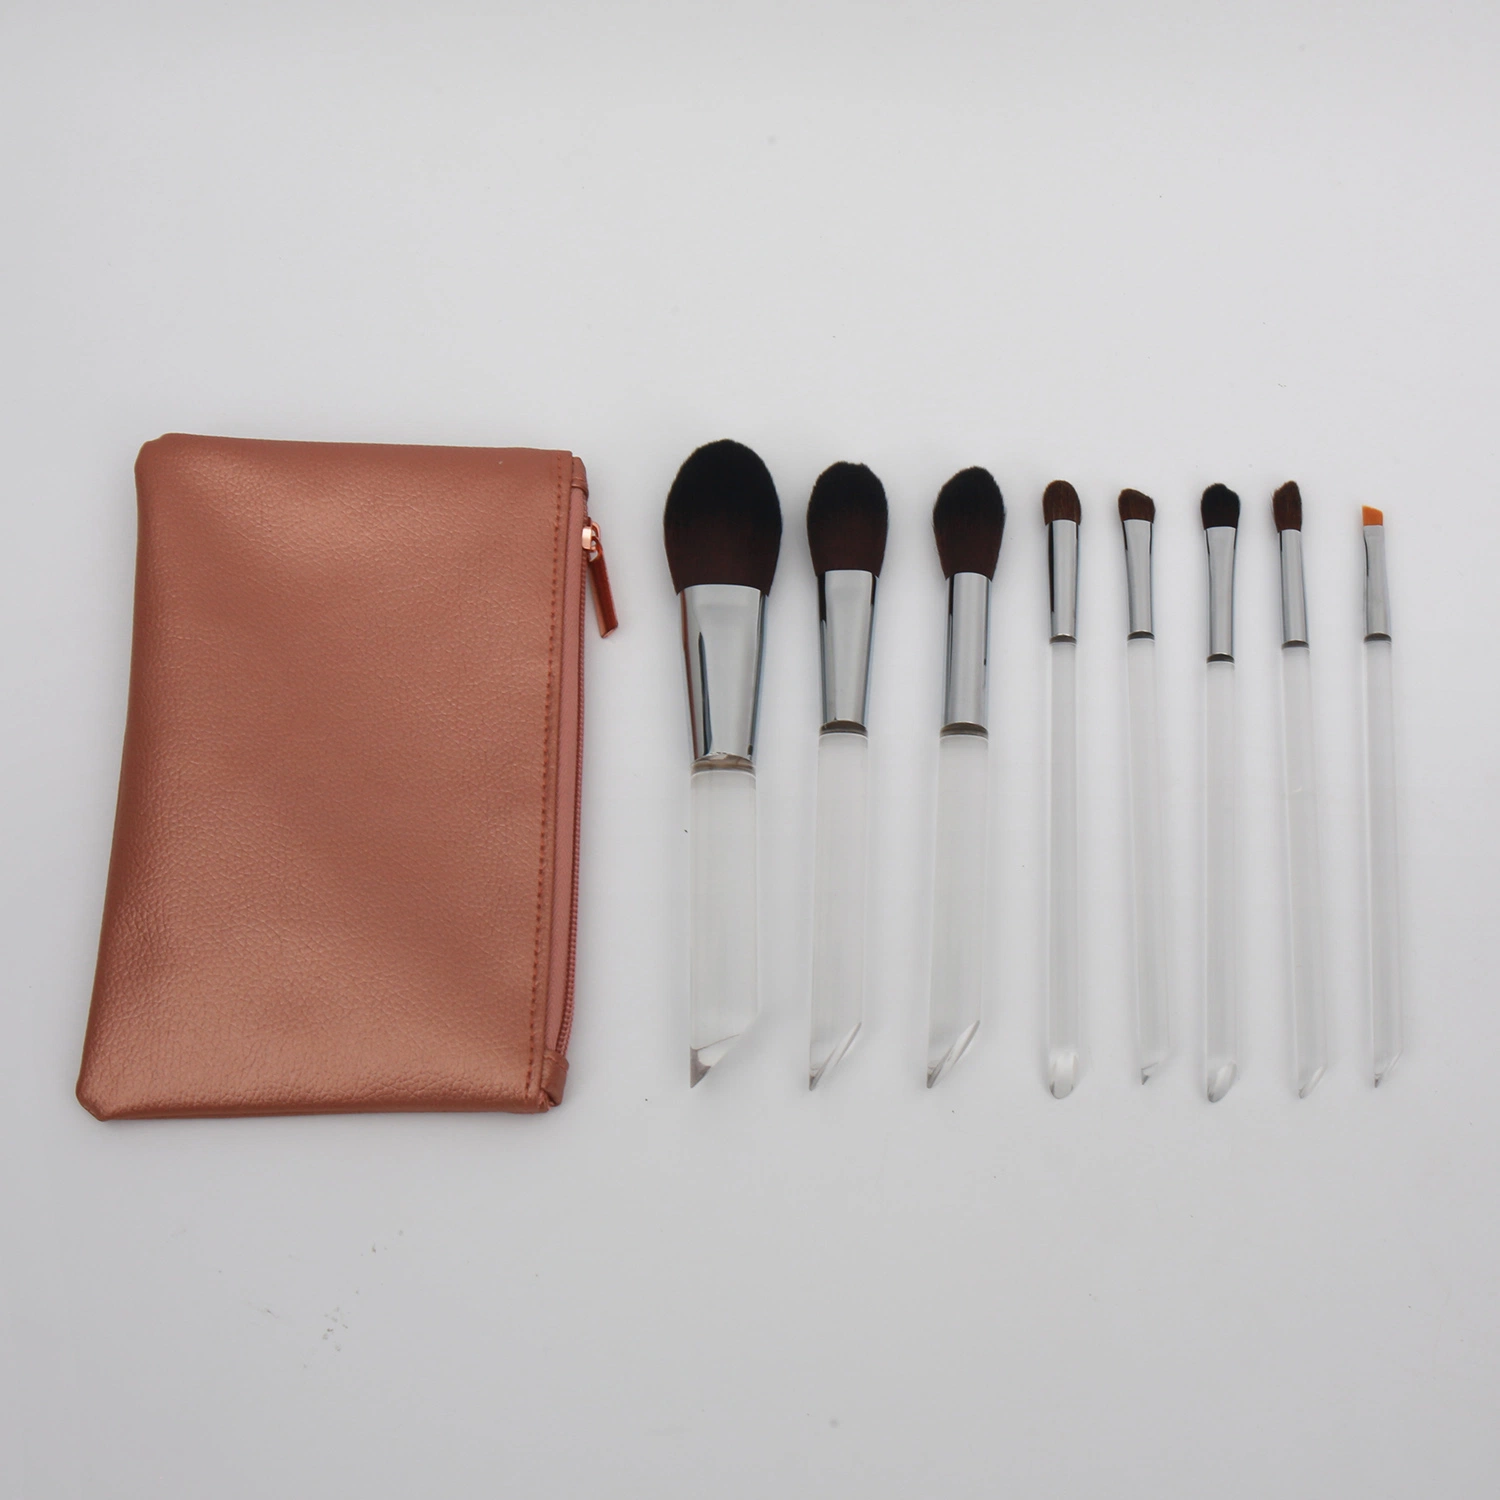 8PCS Makeup Brush Cosmetic Beauty Tool Kits with Synthetic Hair